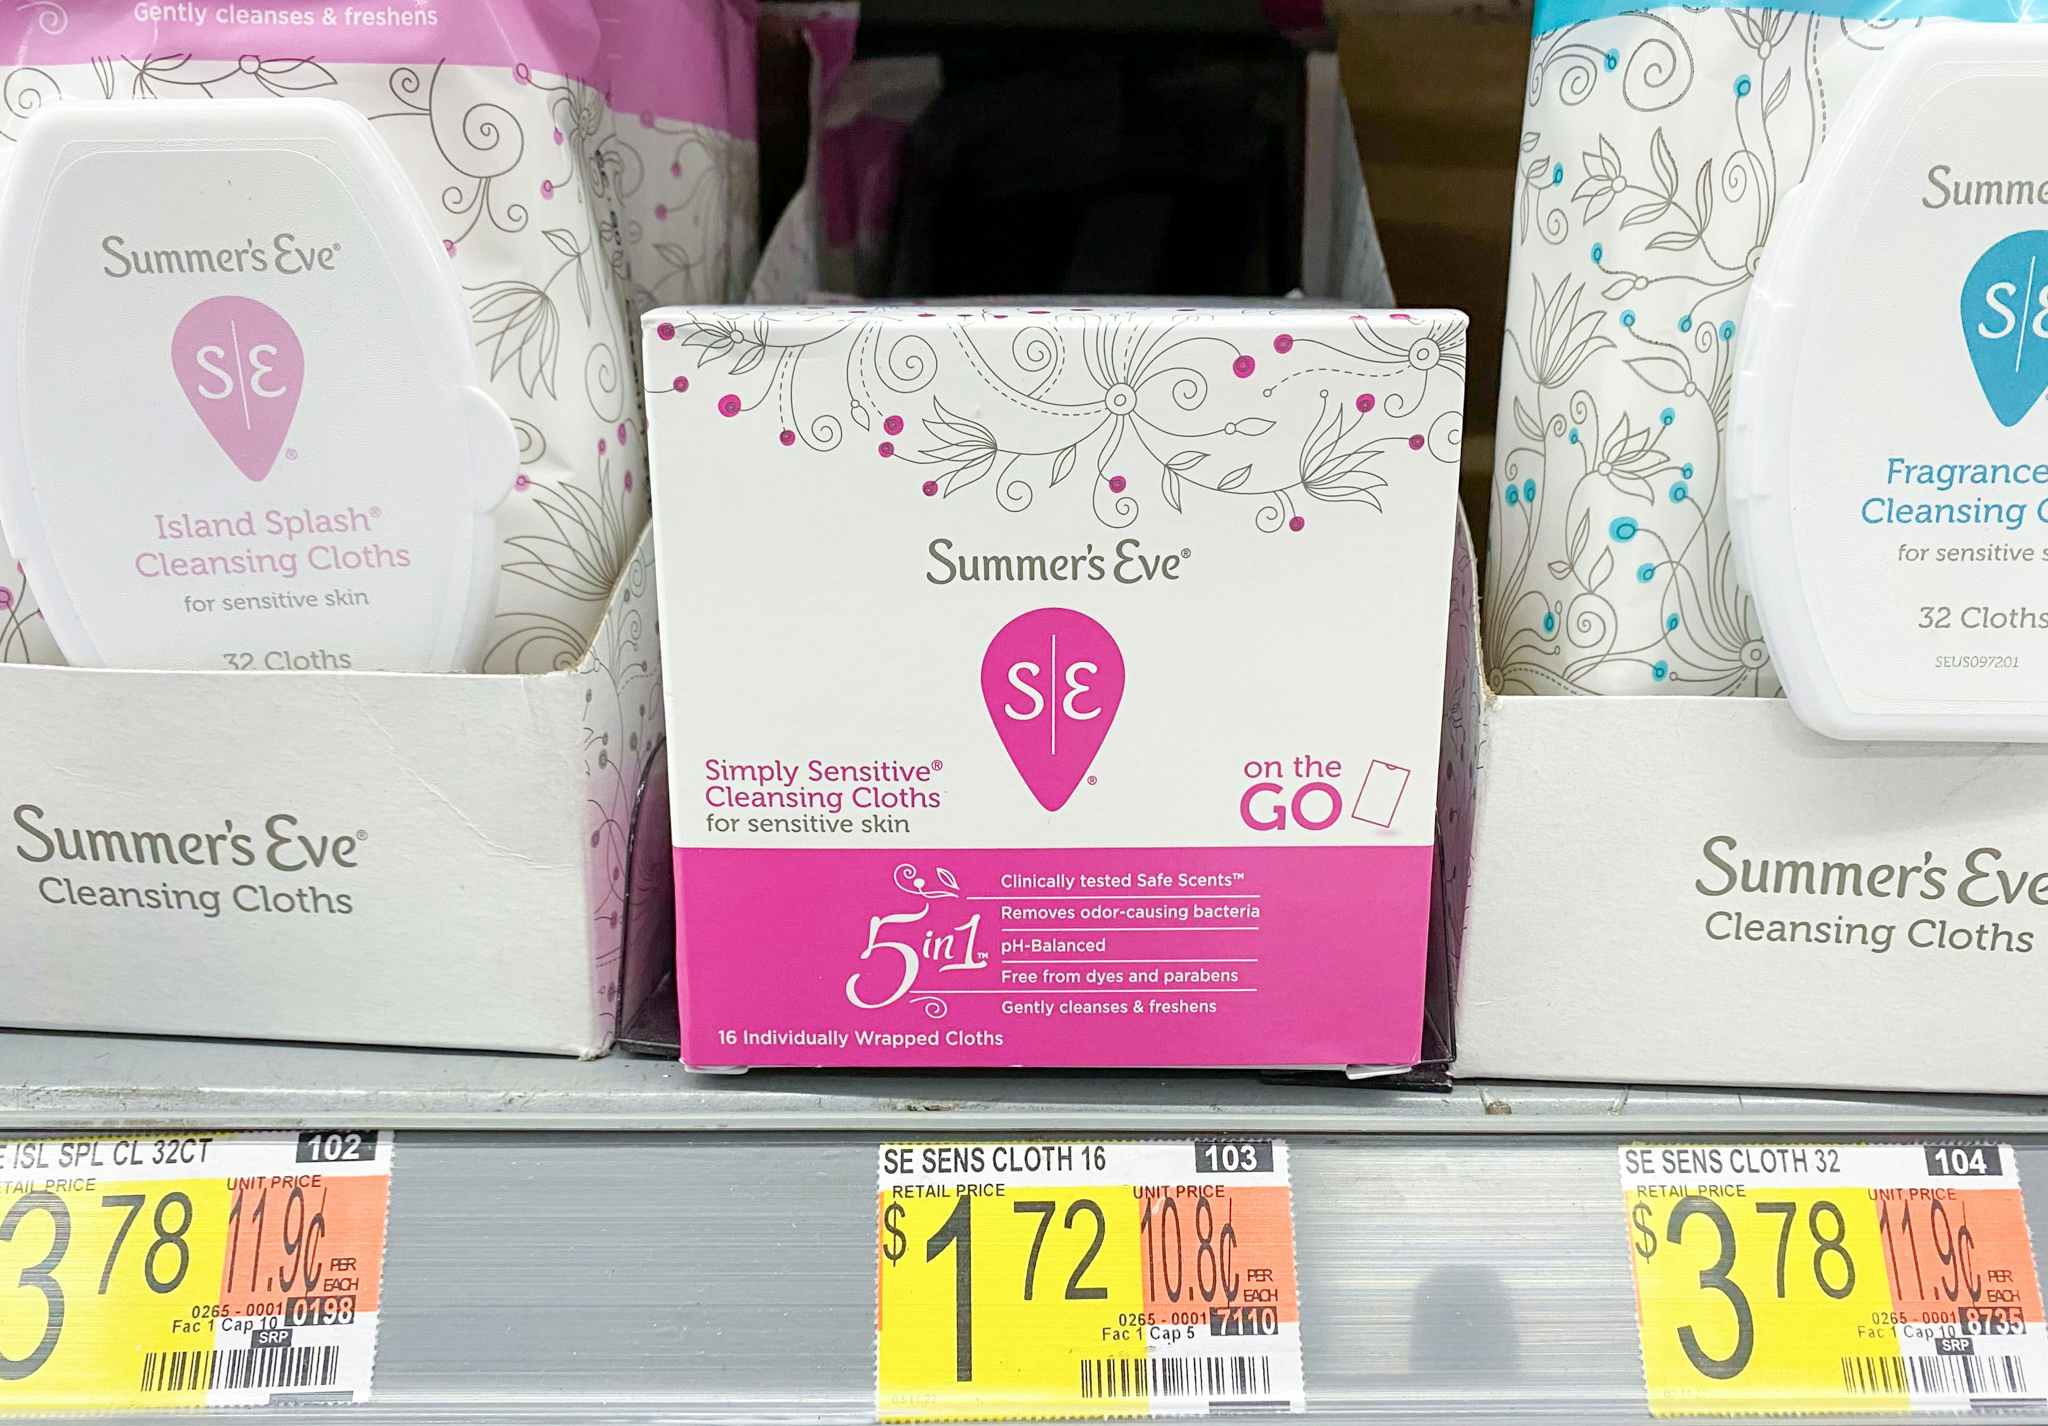 Summers Eve Cleansing Cloths at Walmart